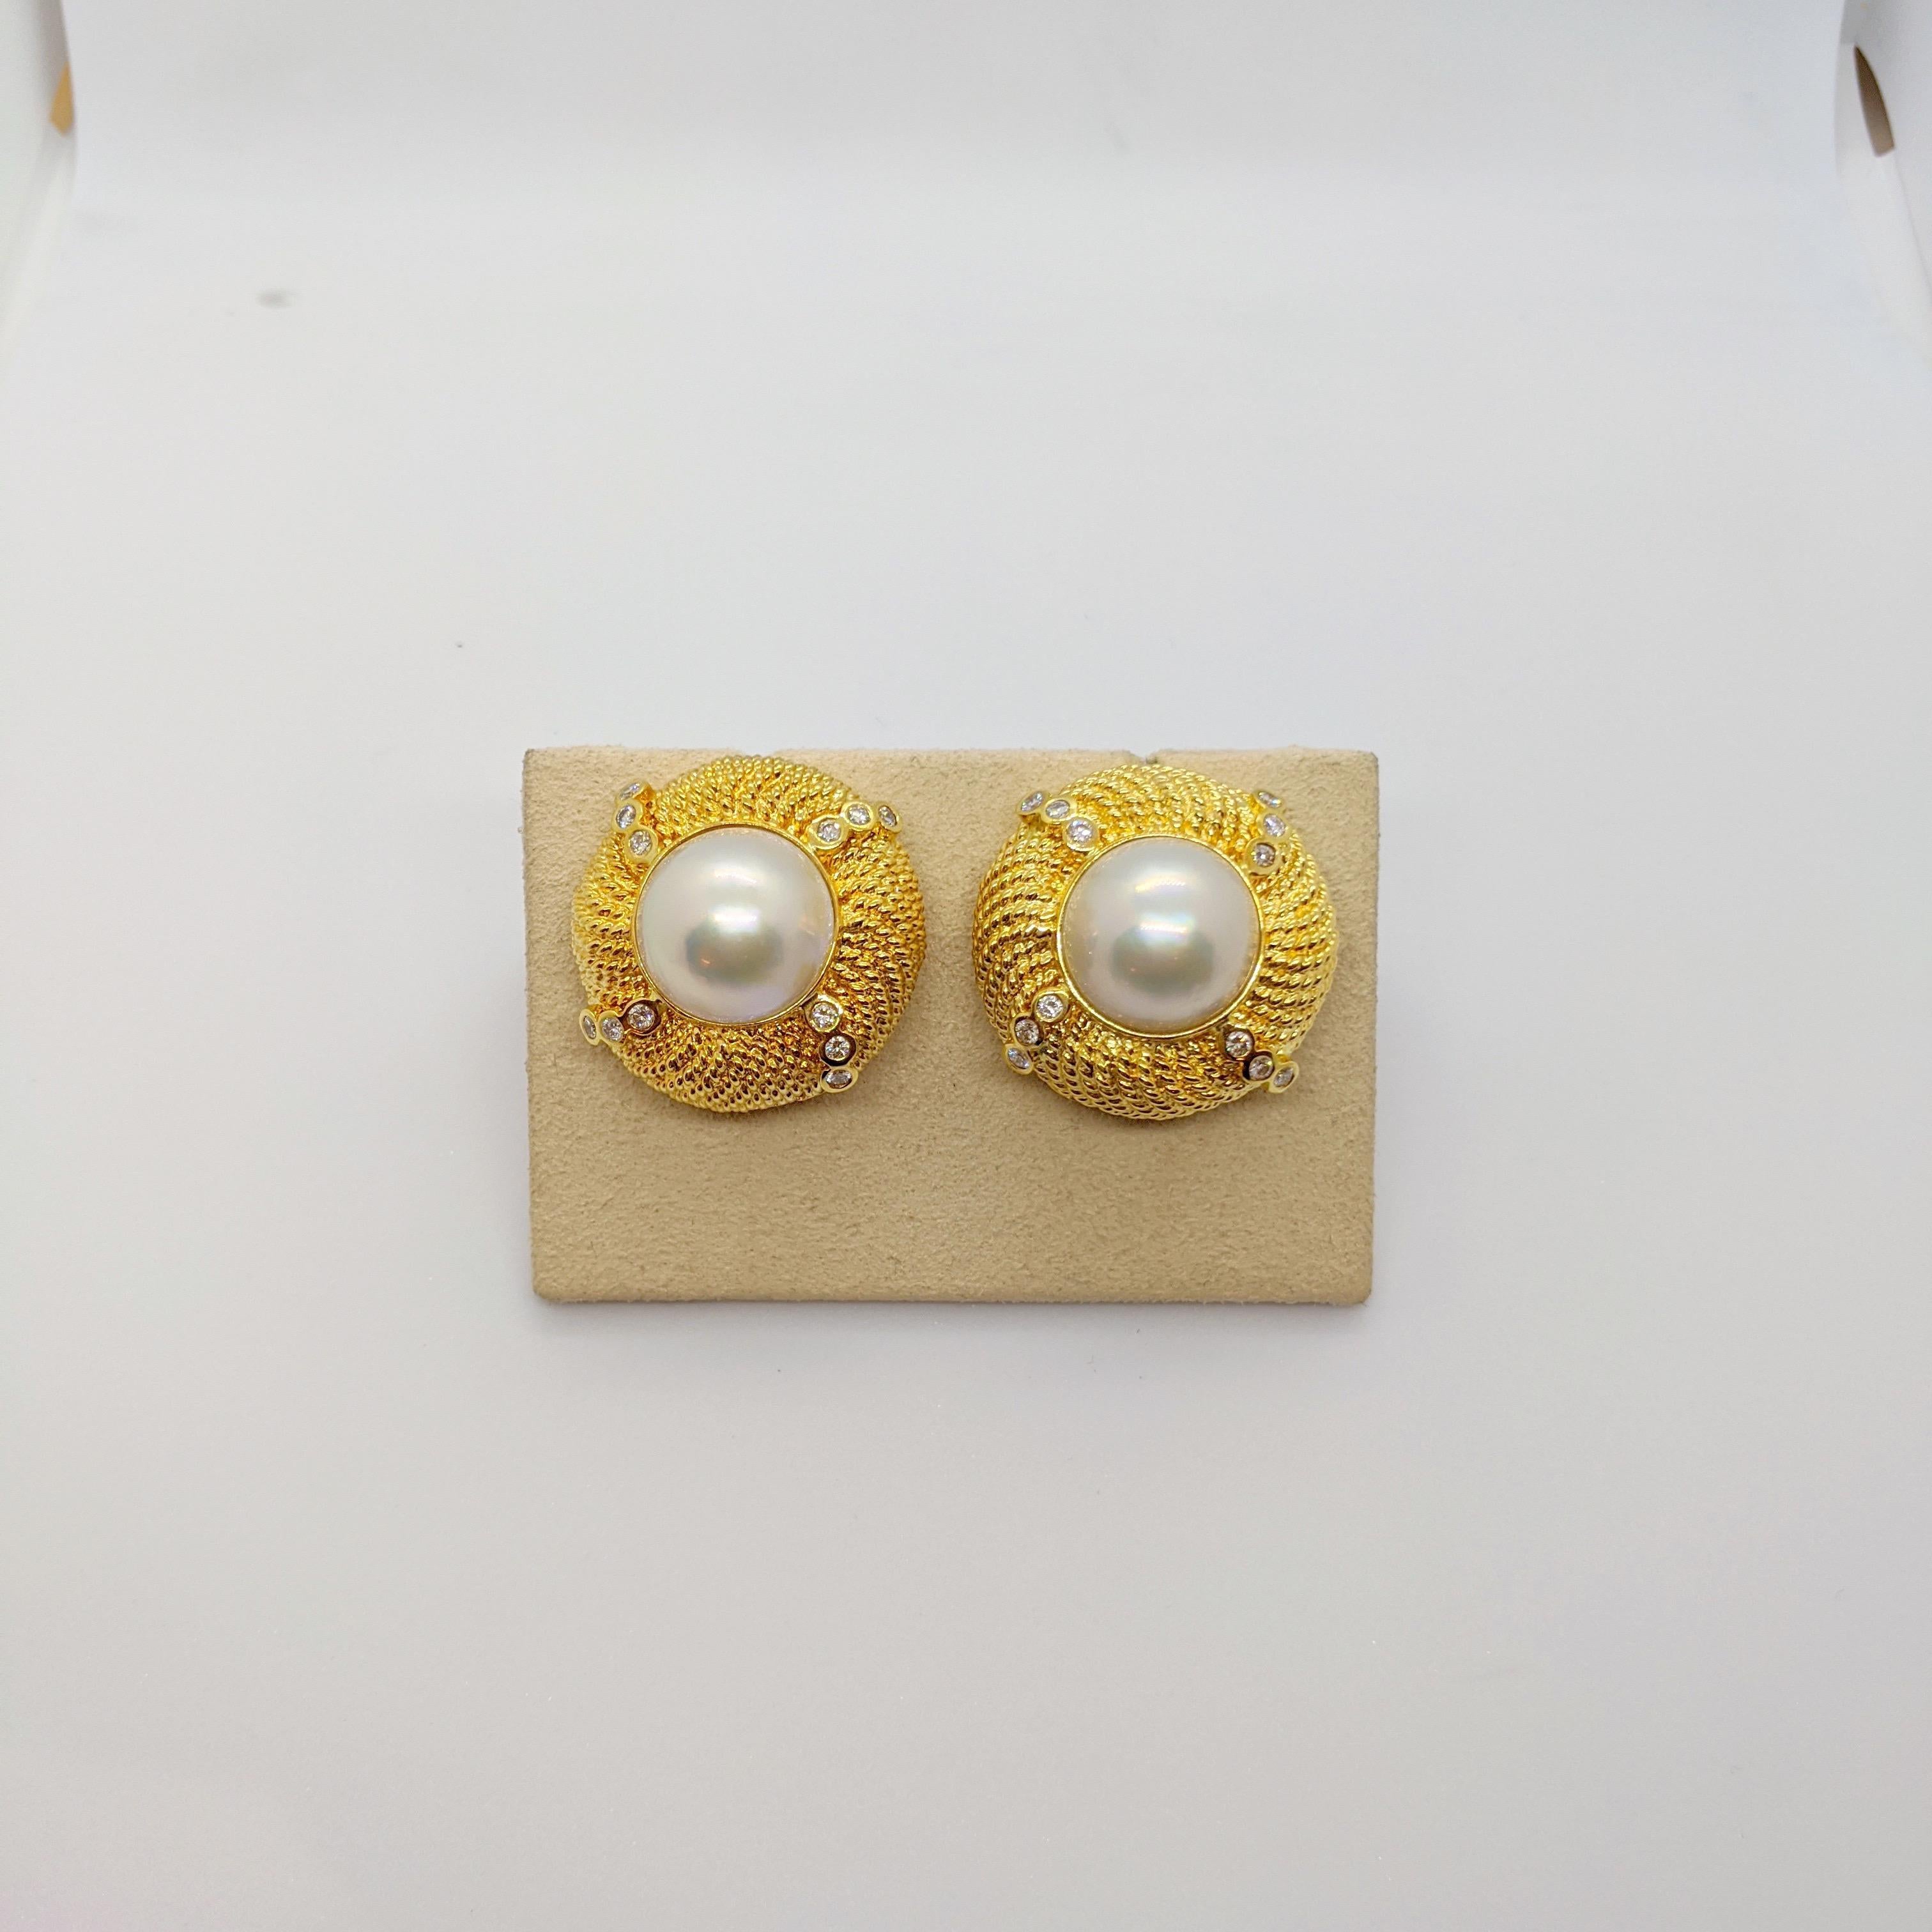 These lovely 18 karat yellow gold earrings have a mabe pearl center. Twelve bezel set diamonds beautifully enhance the round gold button. These earring have a post back with a french clip and can accommodate  pierced and non pierced wearers. 
Total